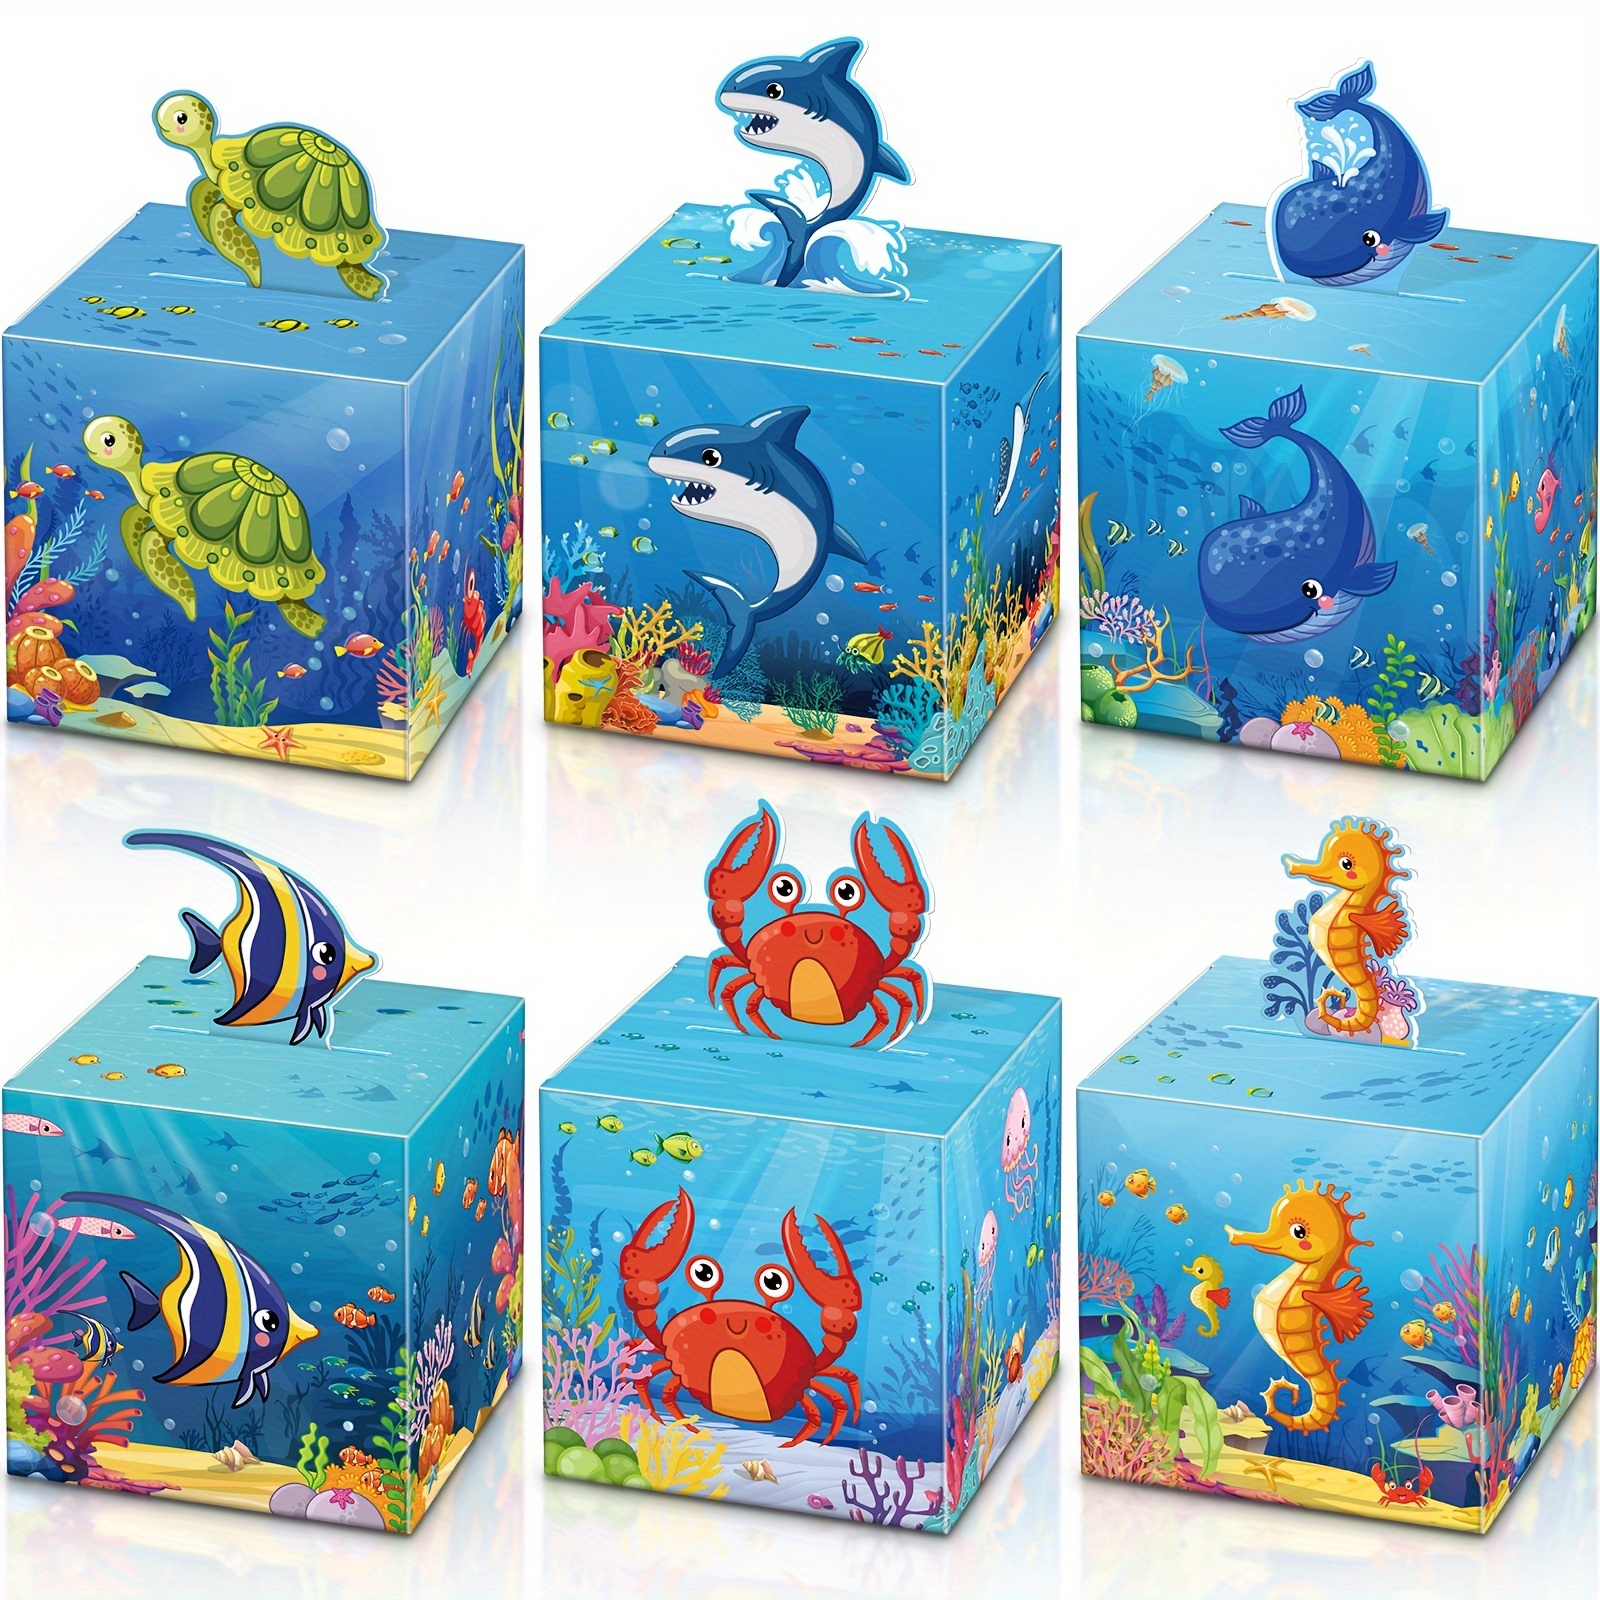 Bottles Small Treasure Chest Plastic Large Pirate Decorations Party Mini  Jewelry Case Birthday Favor Toys From Lizhiibs, $9.84